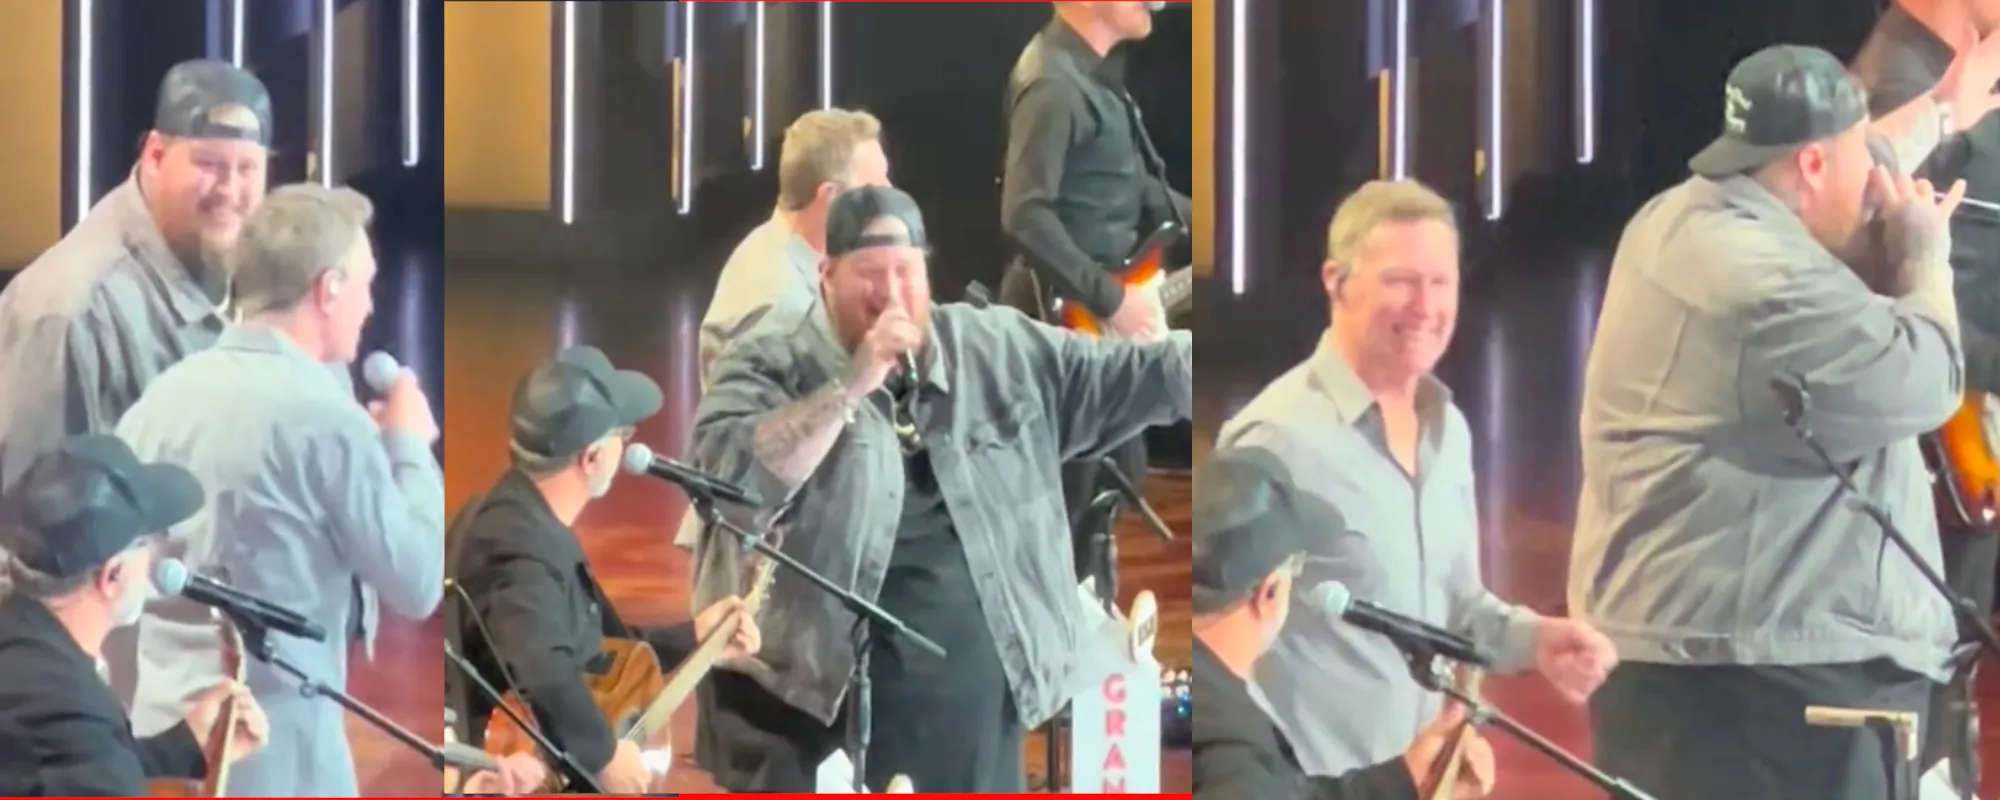 Watch: Jelly Roll Makes a Surprise Appearance at the Grand Ole Opry to Sing “Almost Home” with Craig Morgan